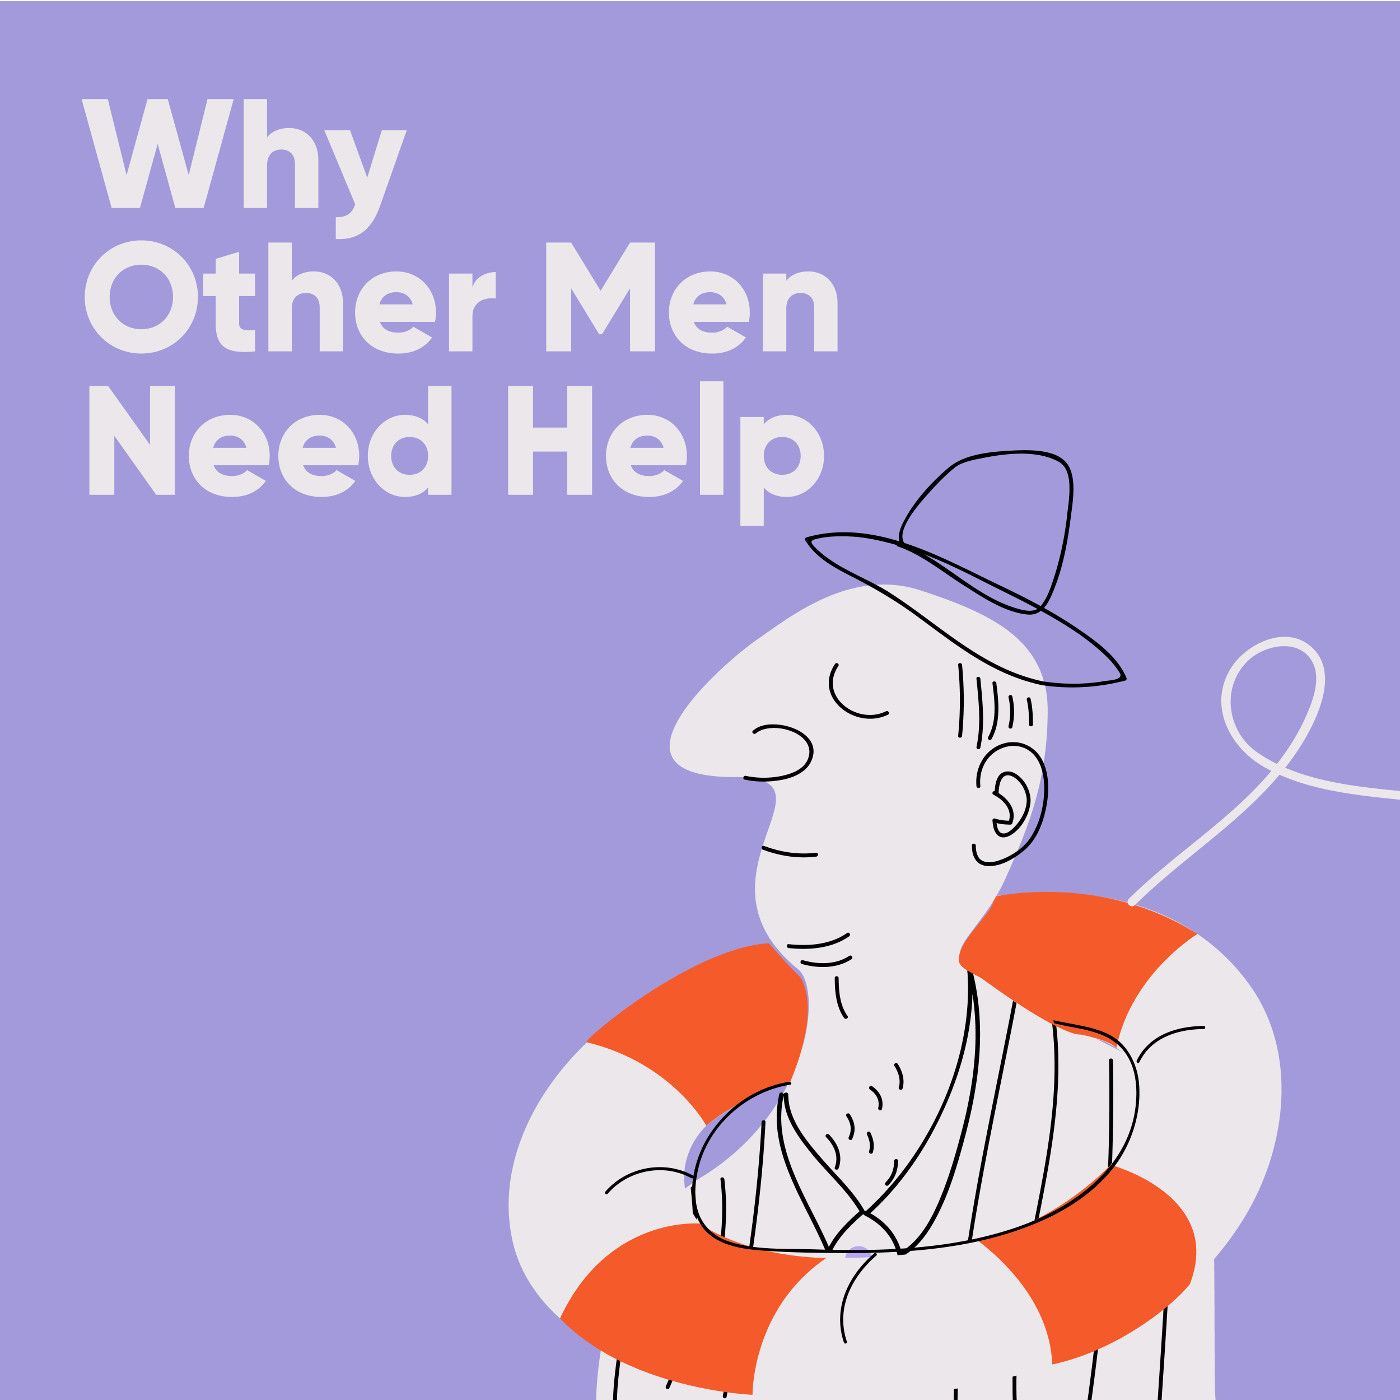 Why Other Men Need Help